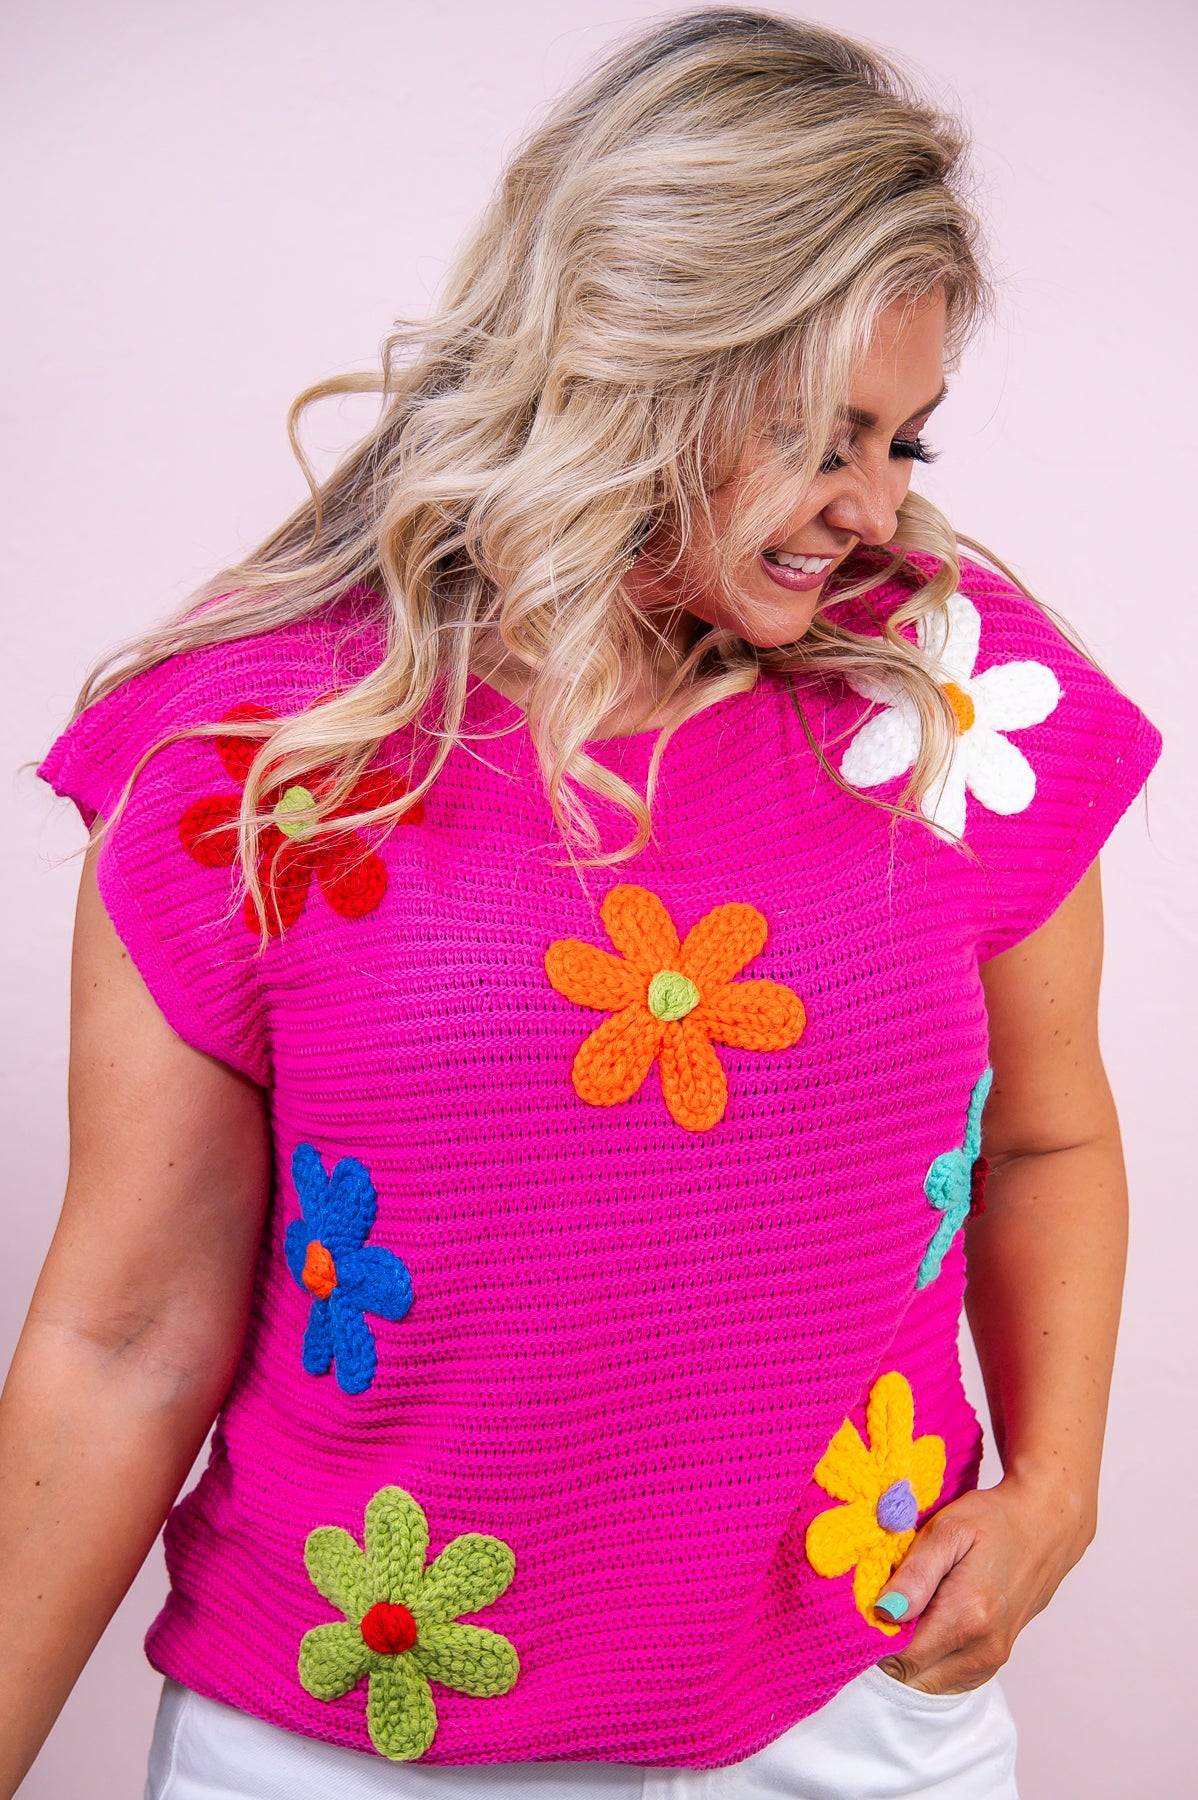 Gardens Of Paris Fuchsia/Multi Color Floral Knitted Top - T9417FU